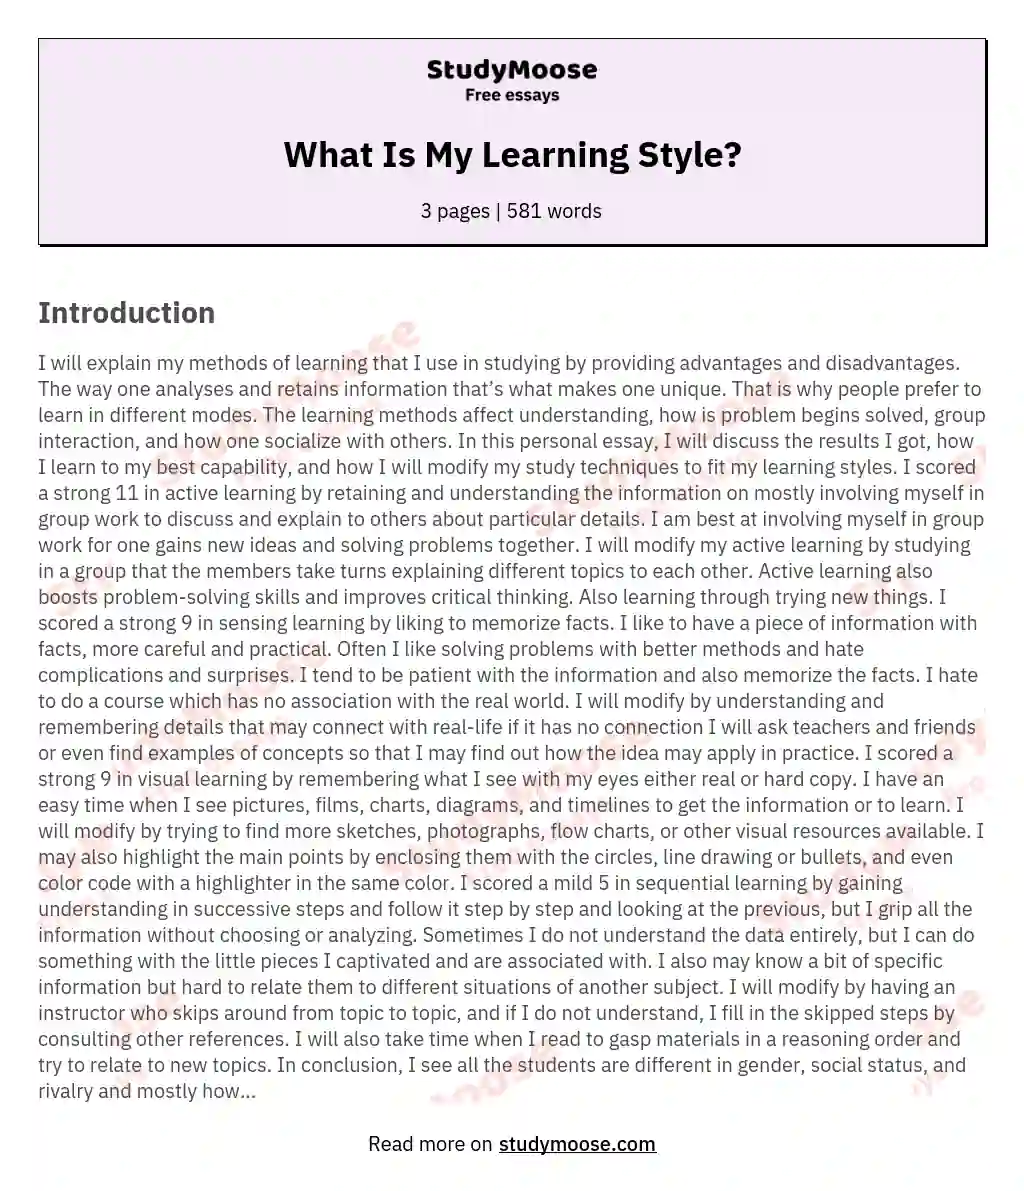 What Is My Learning Style? essay